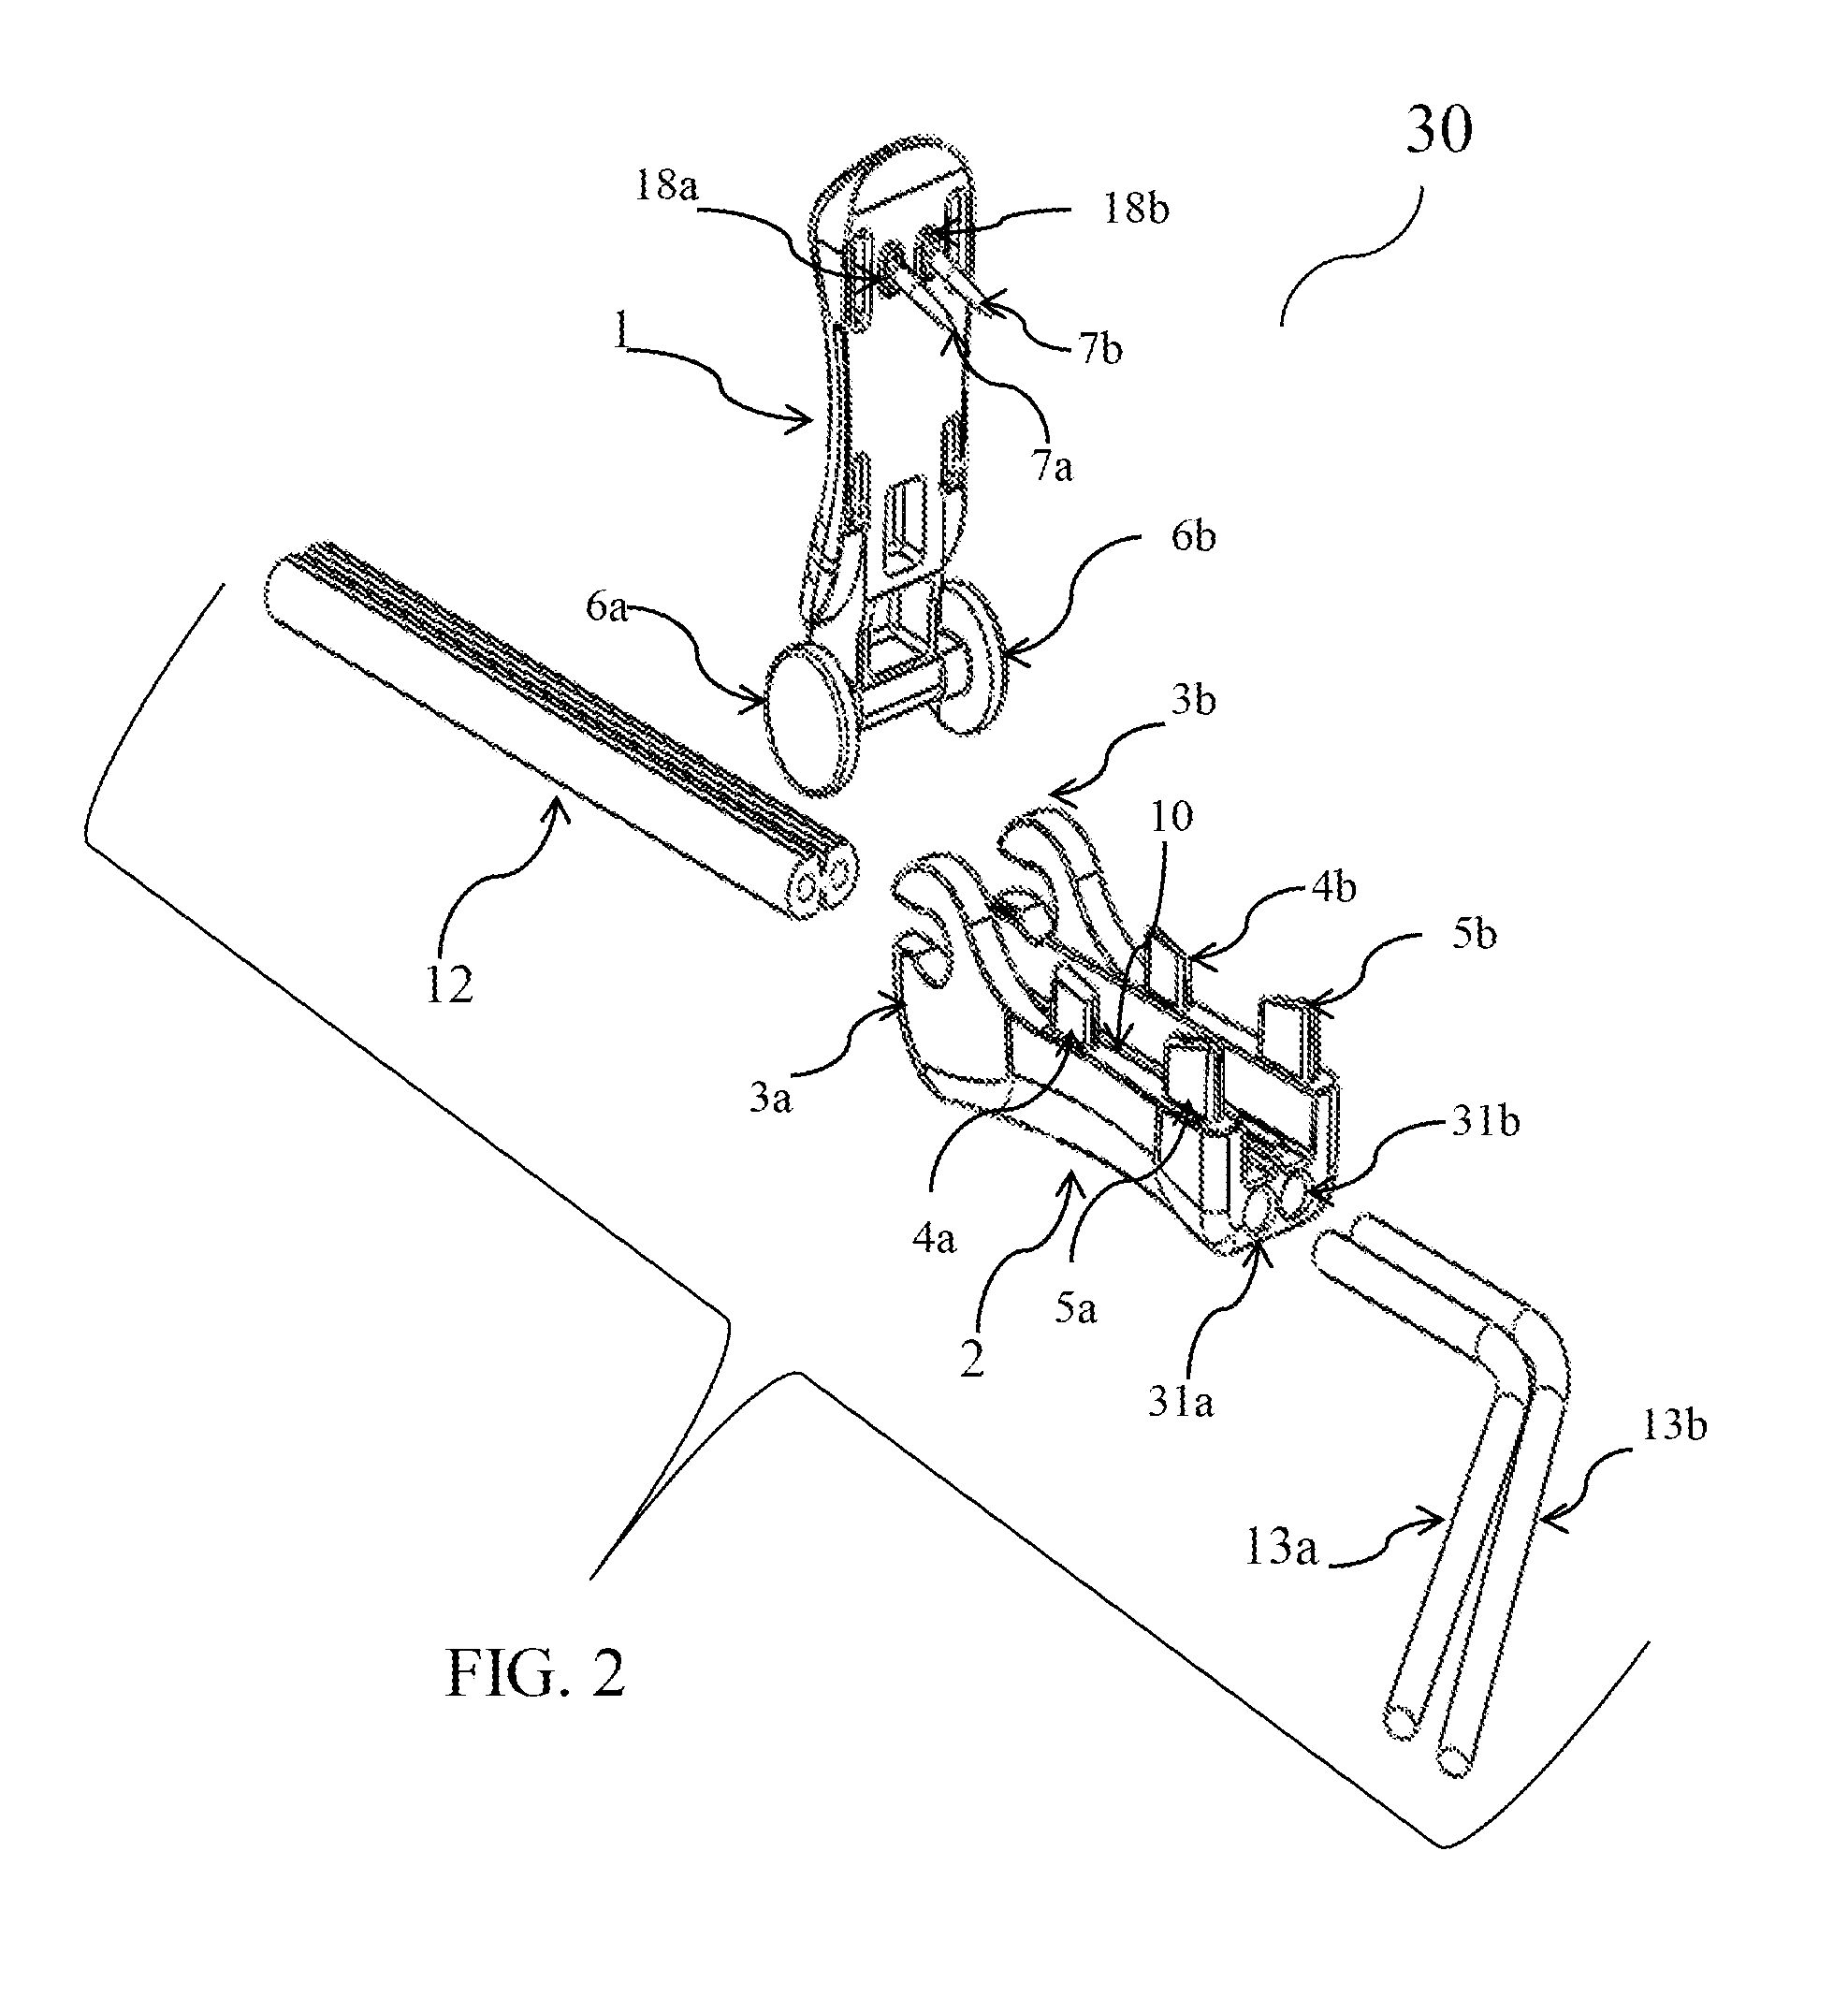 Electrical connector assembly with detachable pivot shaft and pivot hub with insert